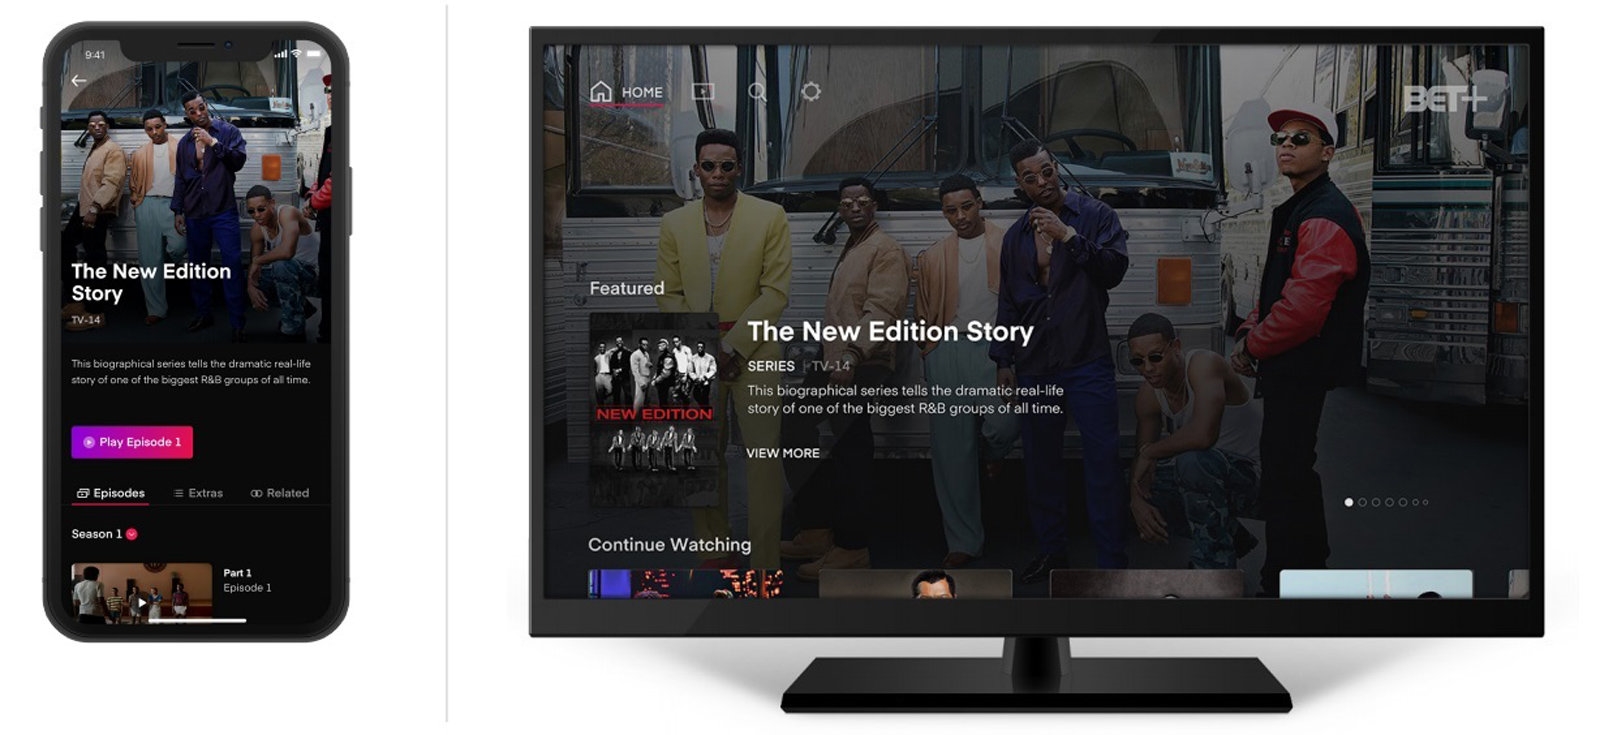 BET+ streaming service launches this fall with Tyler Perry's help | DeviceDaily.com